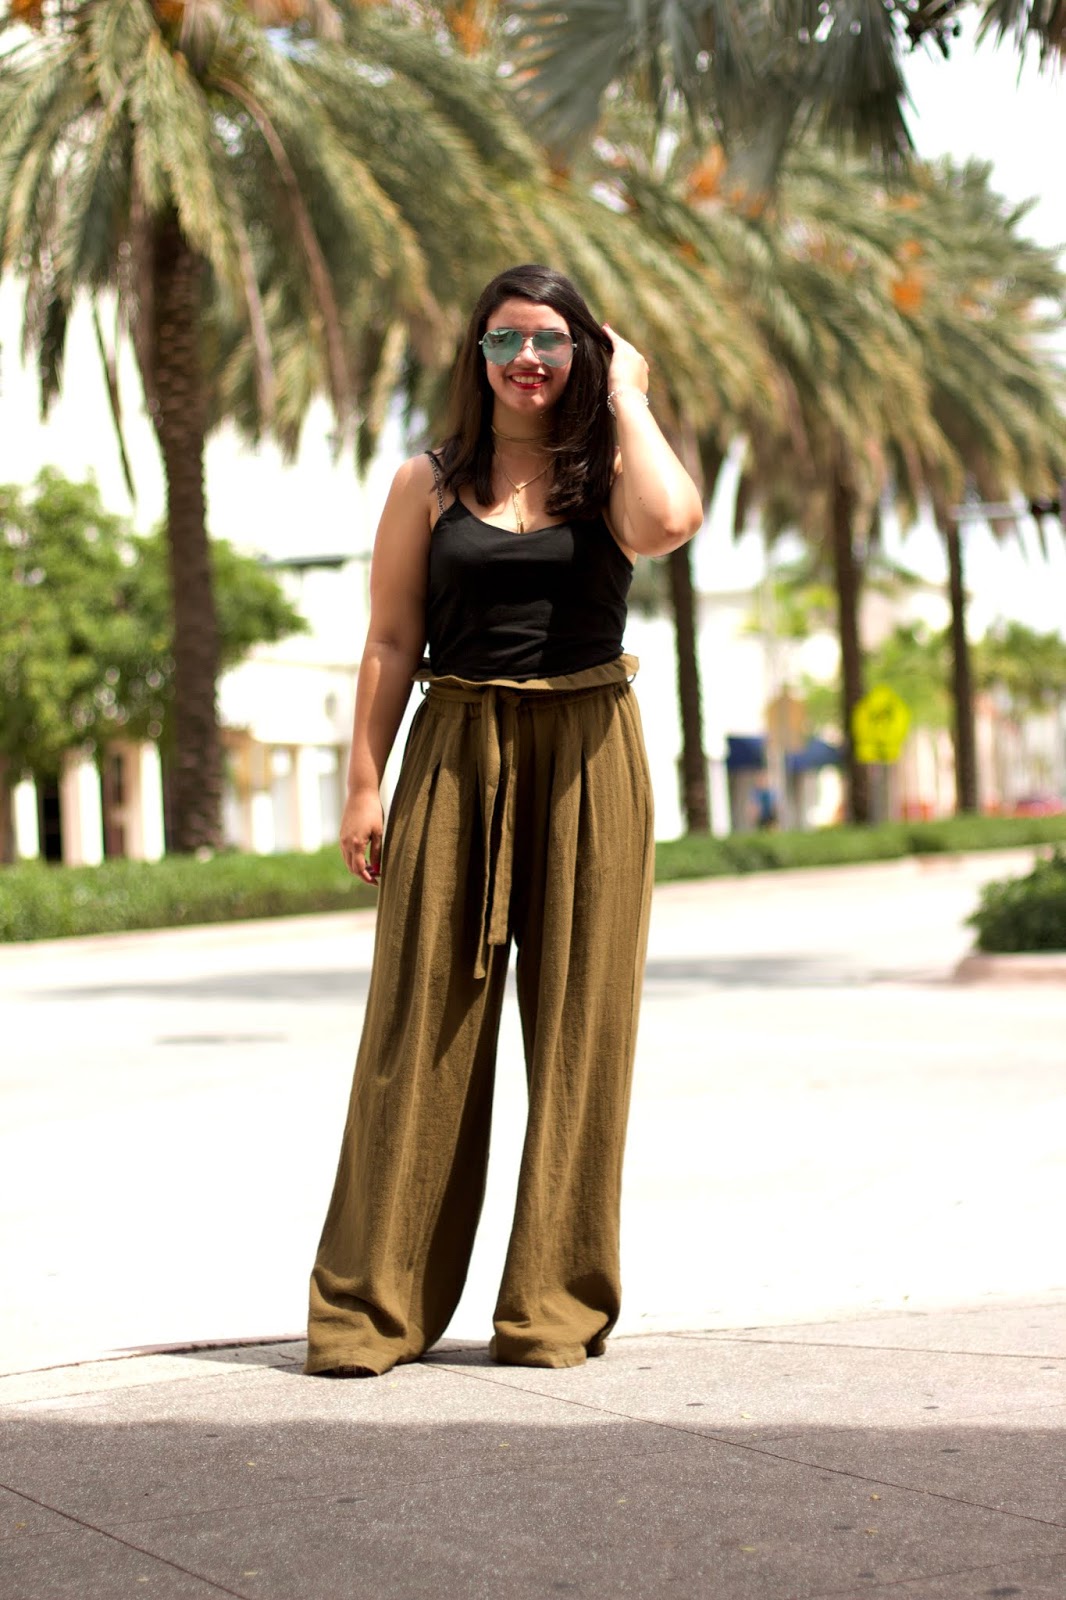 MAKING A STATEMENT IN URBAN WIDE-LEG PANTS | Miss Estephanie - A Life ...